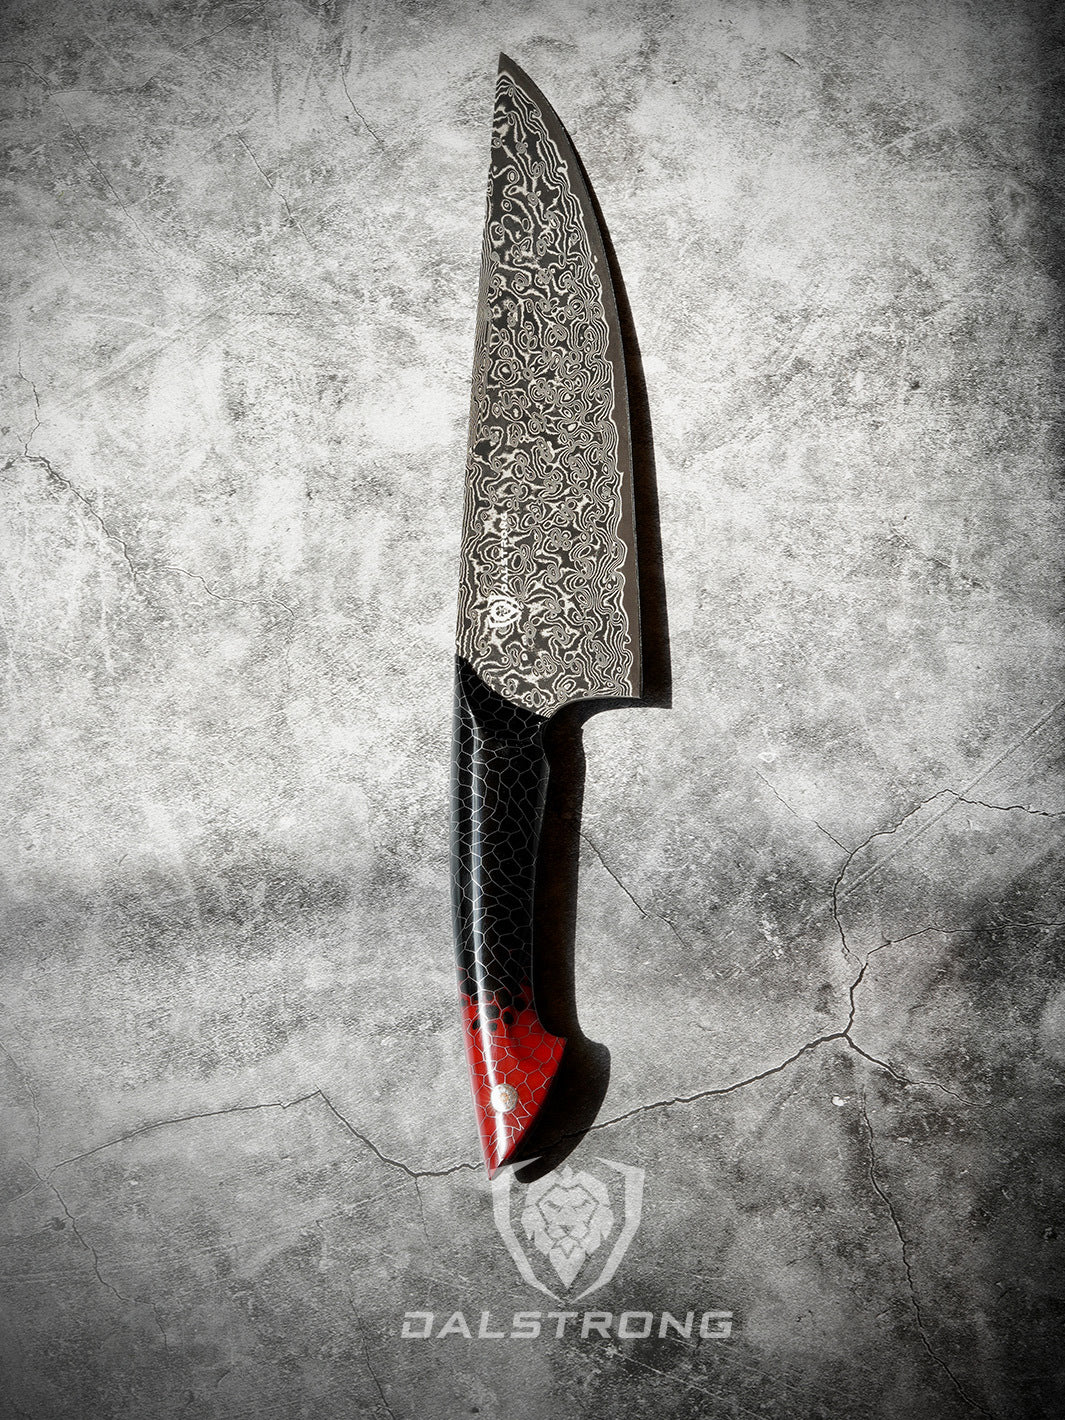 Dalstrong scorpion series 9.5 inch chef knife with red handle on a rough surface.